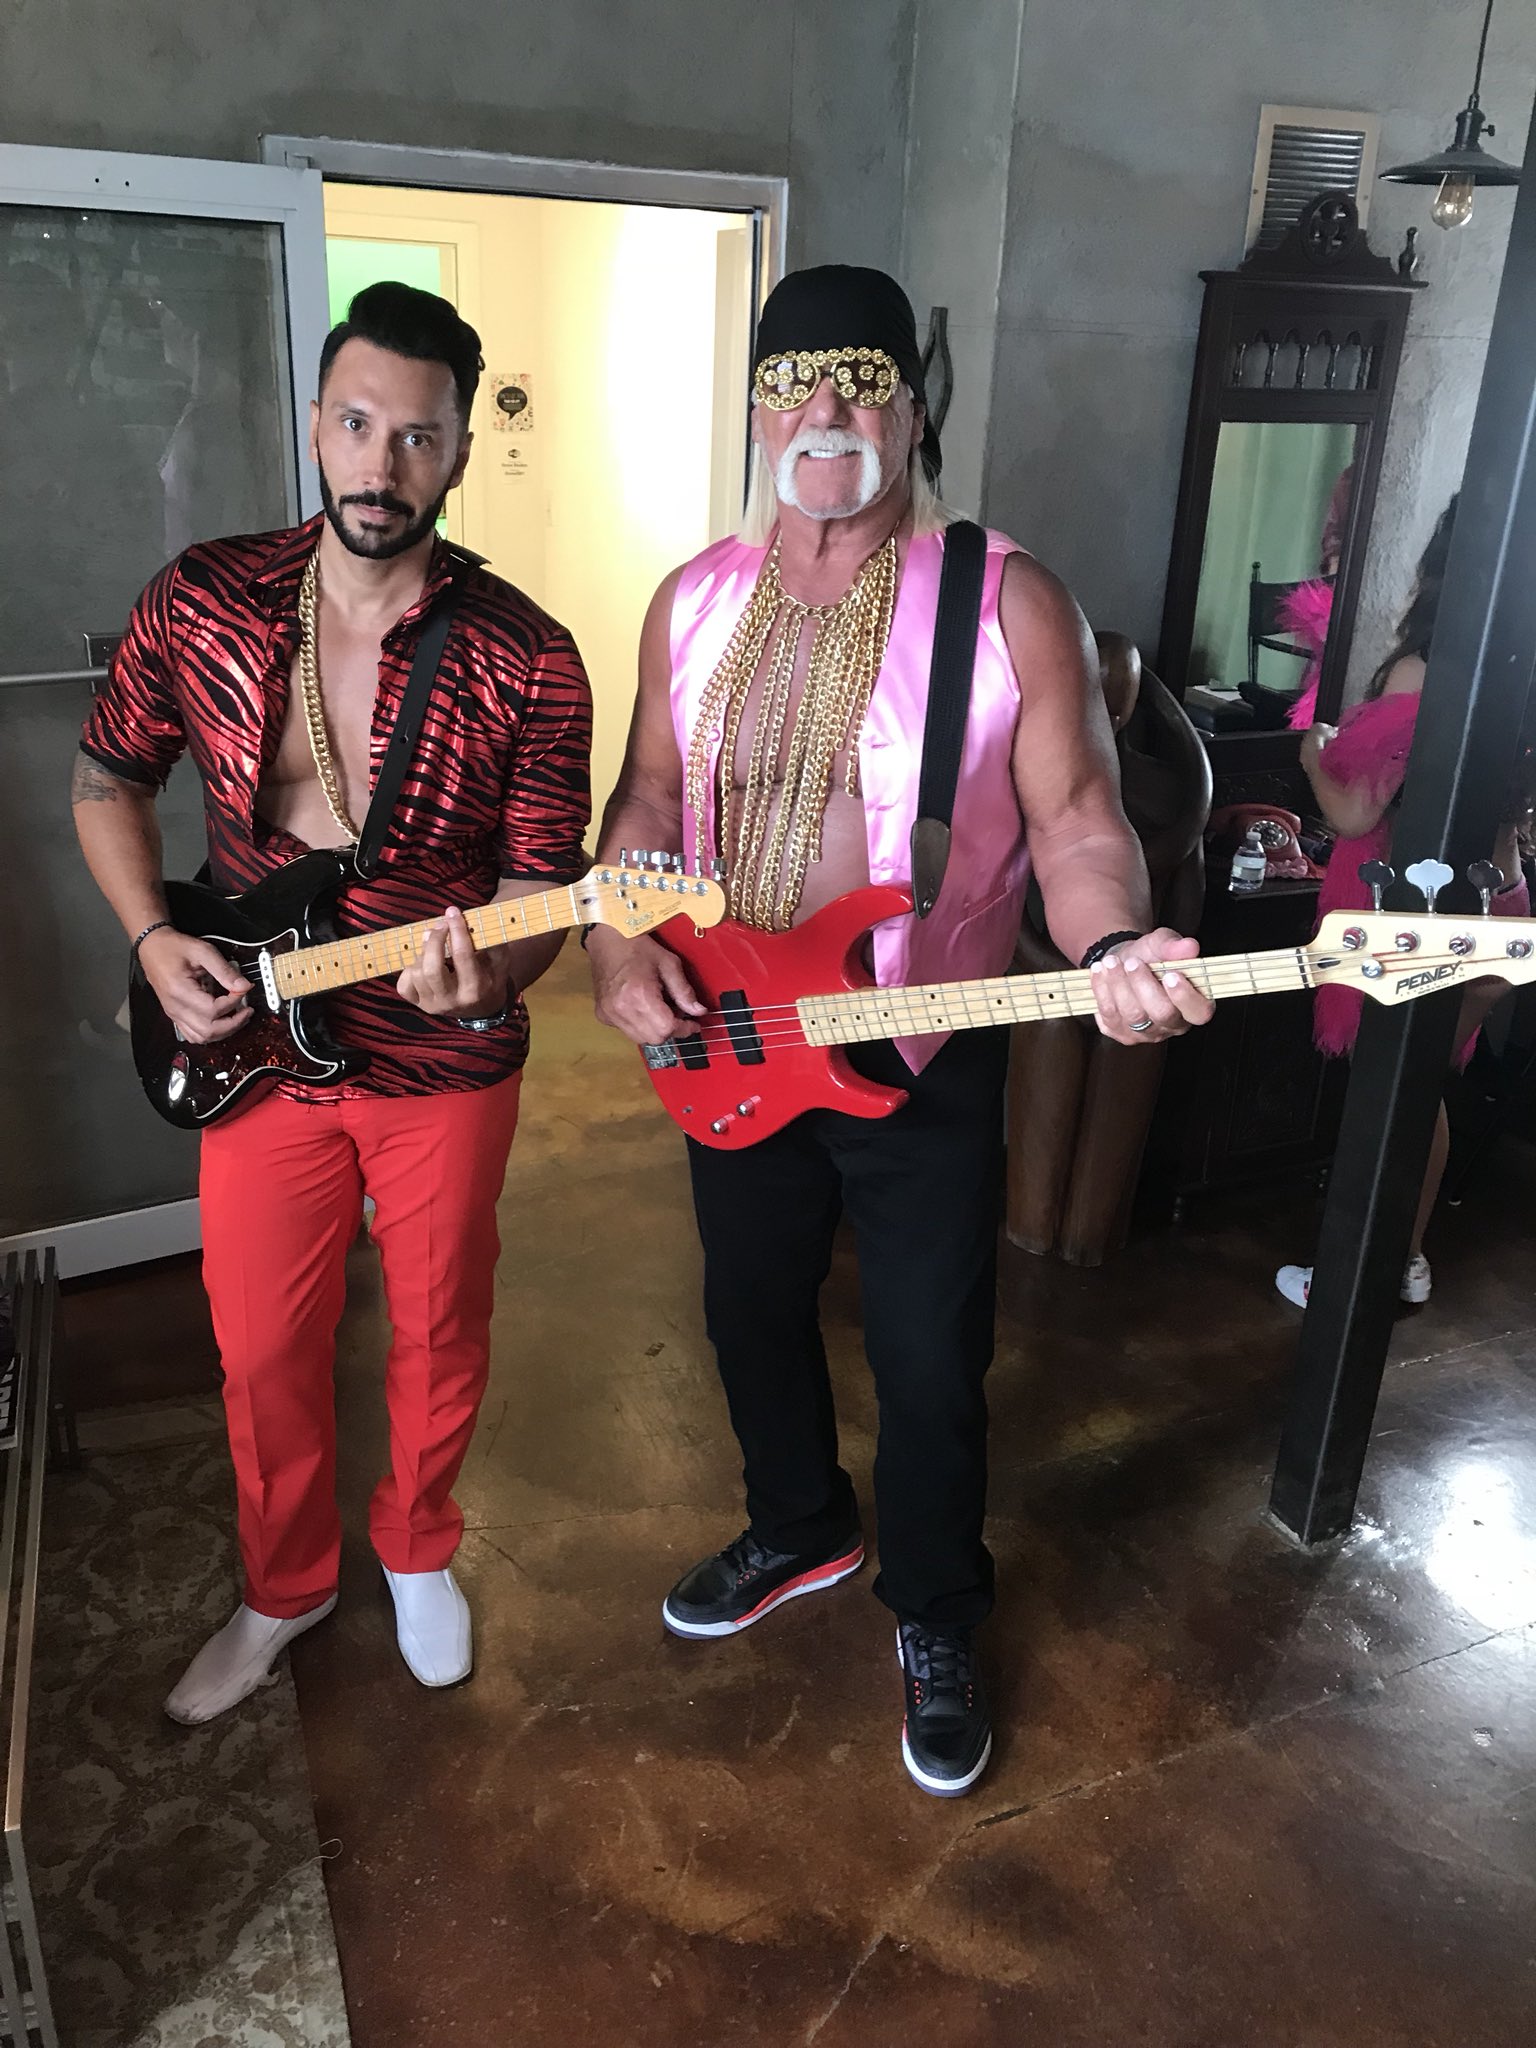 realistisk skygge Pigment Hulk Hogan on Twitter: "So @CedricGervais needed a bass player so we're  taking this show to the top brother. HH #miami #Hulkamania #music  #behindthescenes https://t.co/XTvvoi8Reg" / Twitter